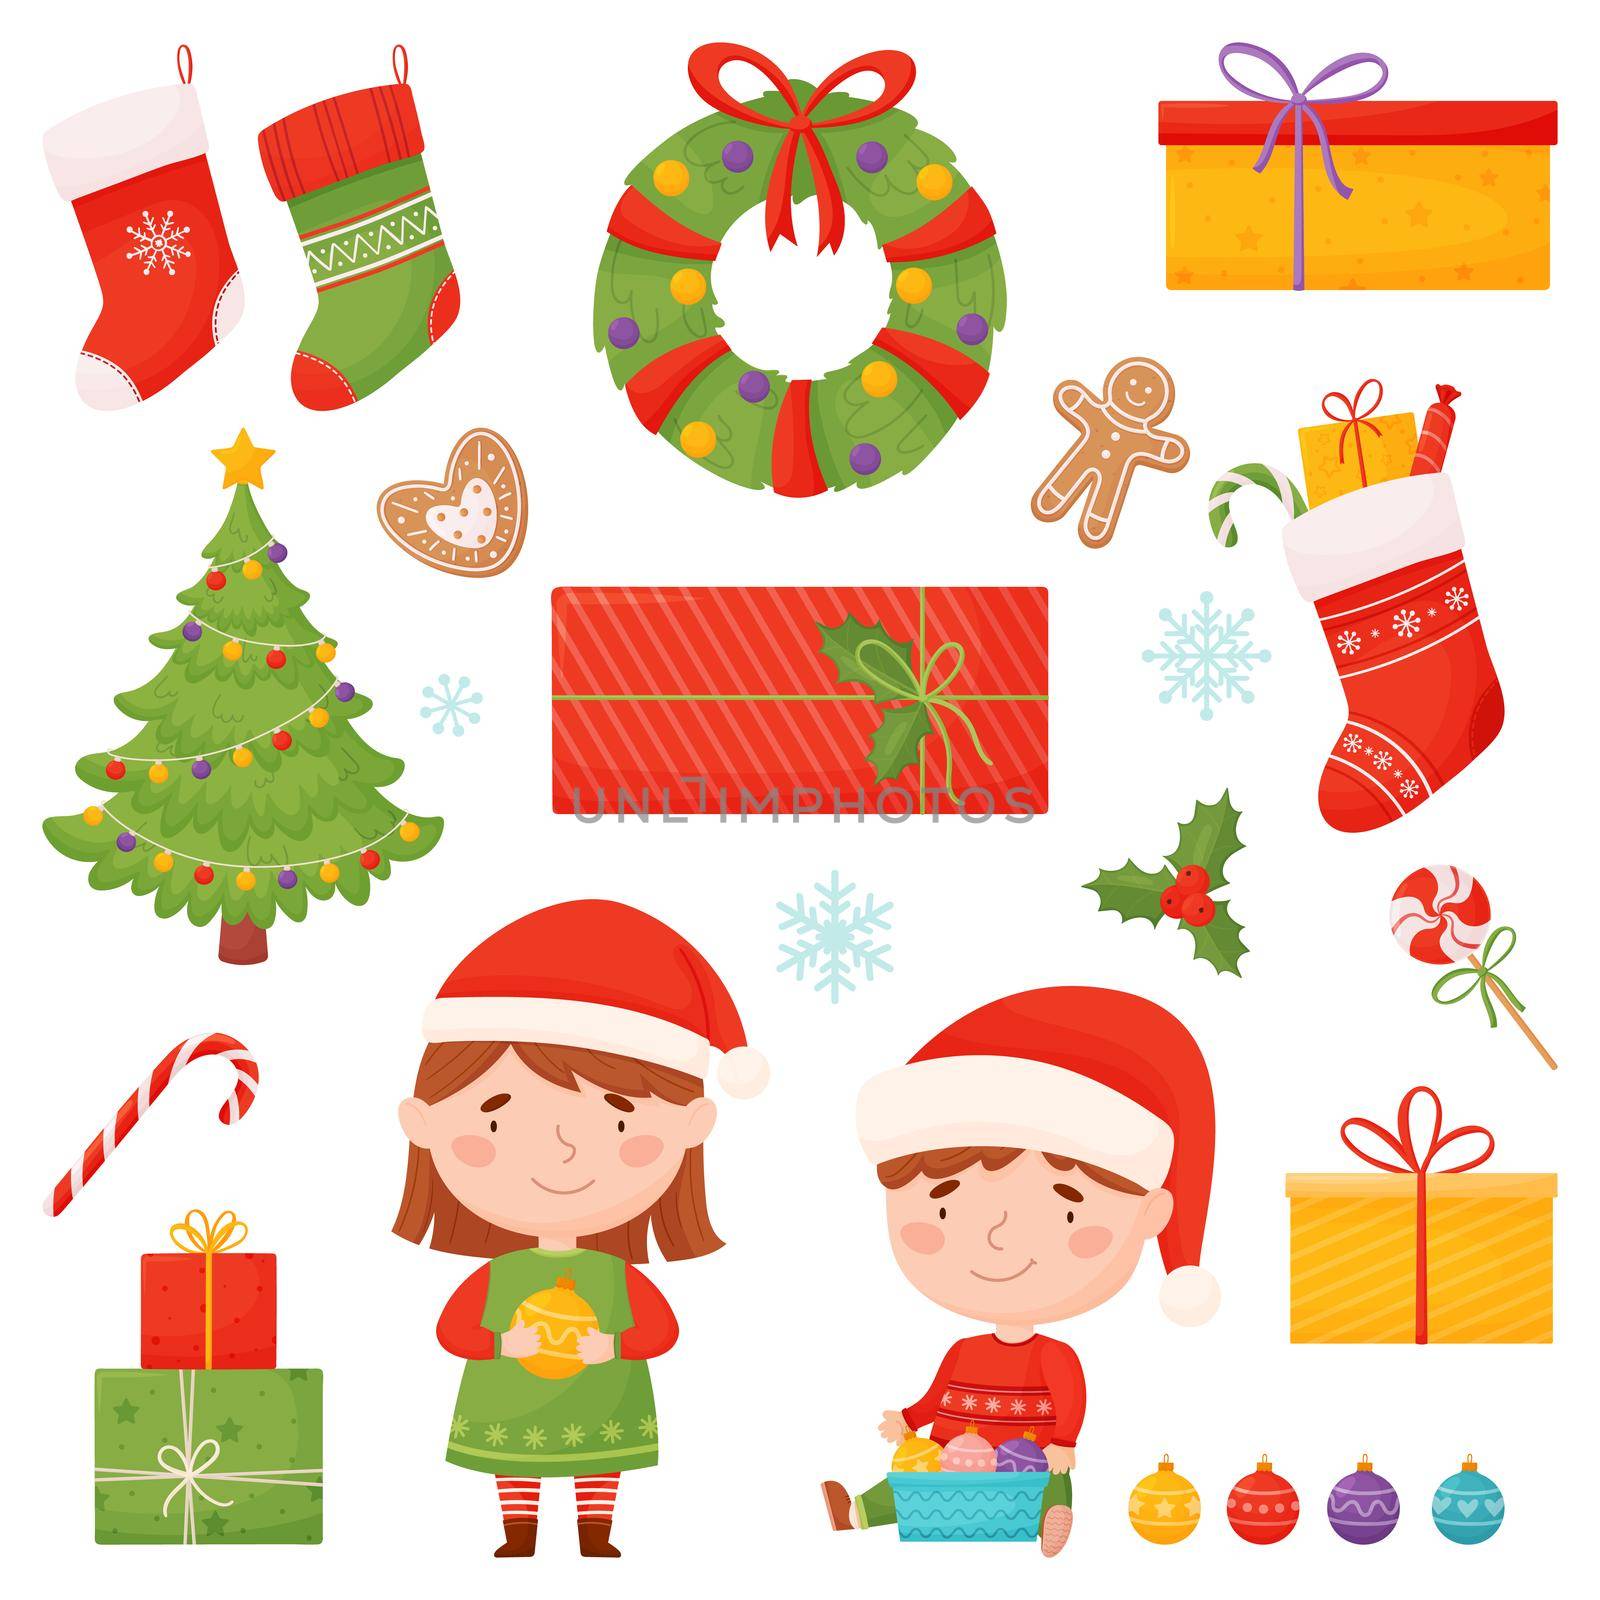 Christmas set of characters and elements in cartoon style. Christmas tree, gifts, sweets, snowflakes, children, Christmas wreath, etc. by Lena_Khmelniuk